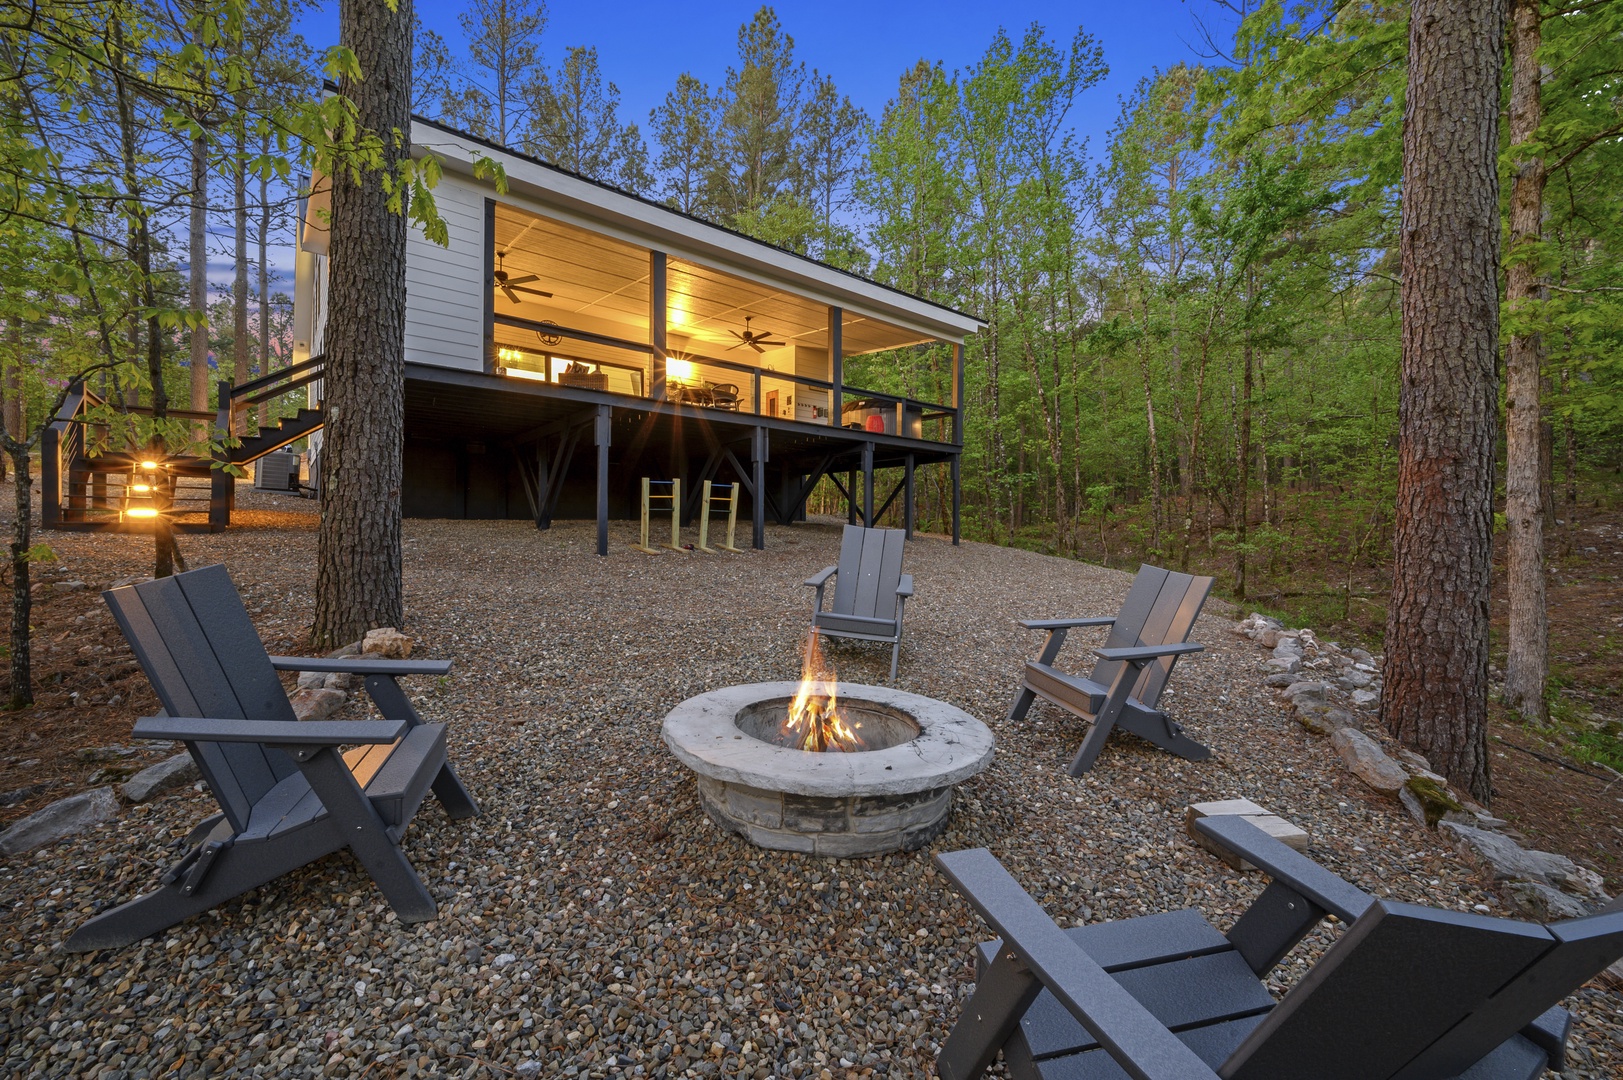 Step down to the fire pit for evening stargazing or roasting marshmallows